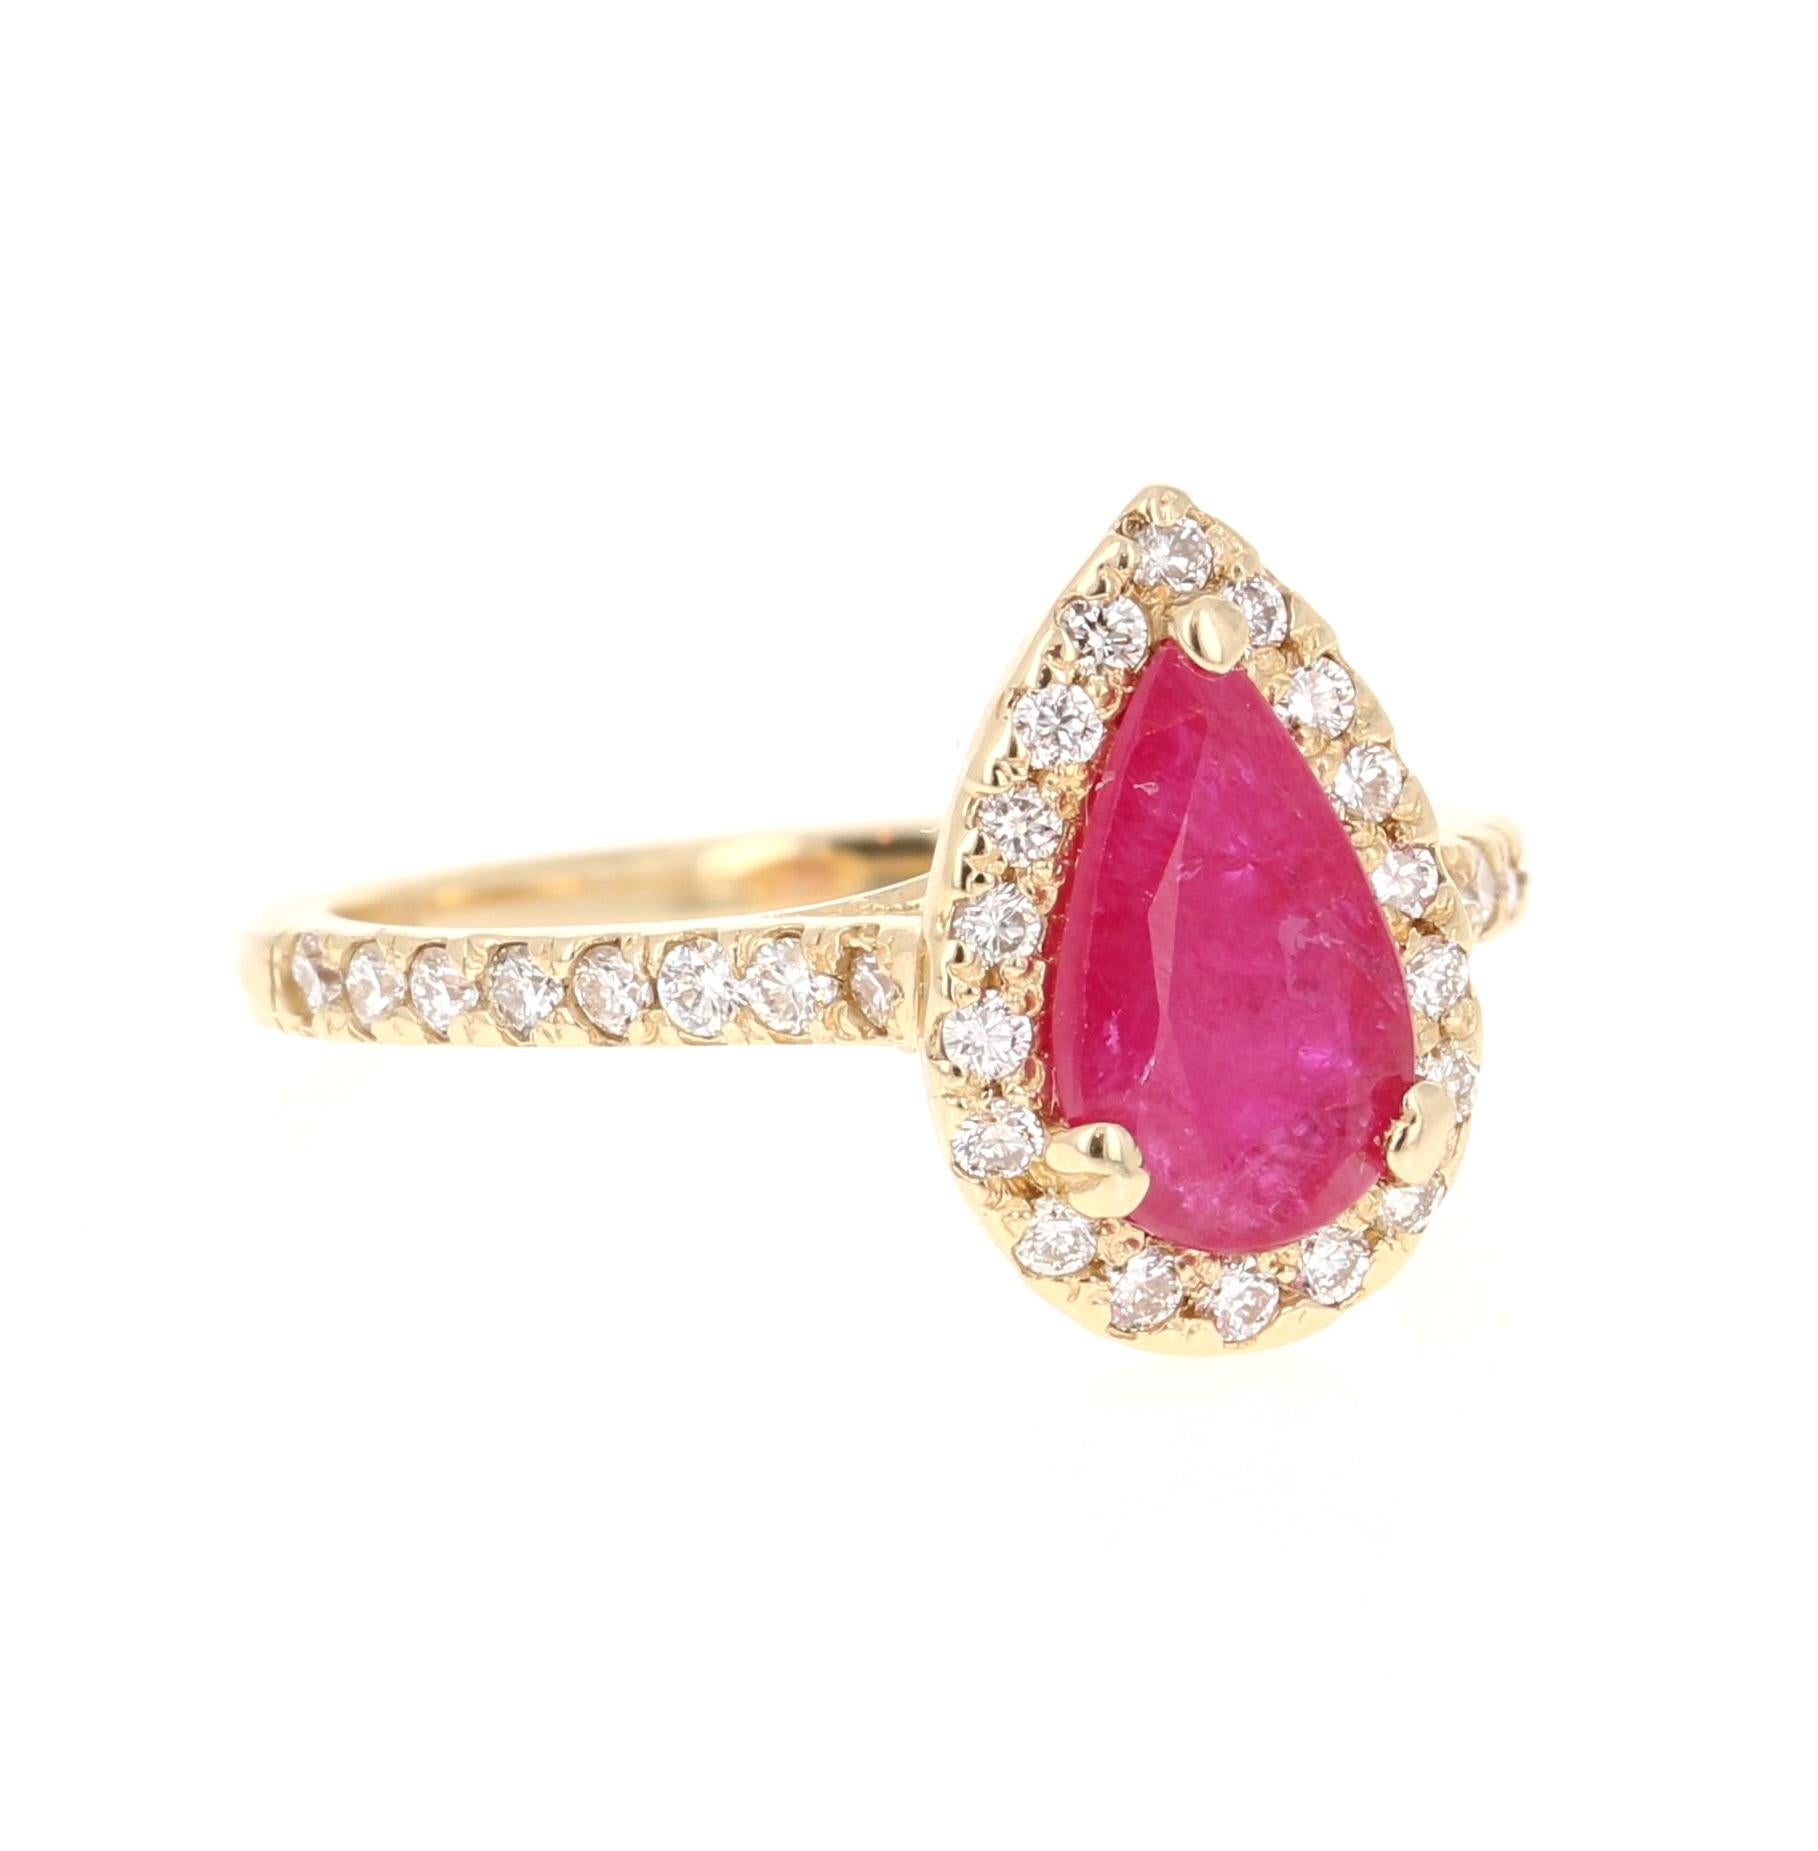 A simple yet beautiful ring with a 1.18 Carat Pear Cut Ruby as its center and 36 Round Cut Diamonds that weigh 0.69 carats. (Clarity: VS, Color: H) The total carat weight of the ring is 1.87 Carats. The Ruby measures at 6 mm x 9 mm and the face of